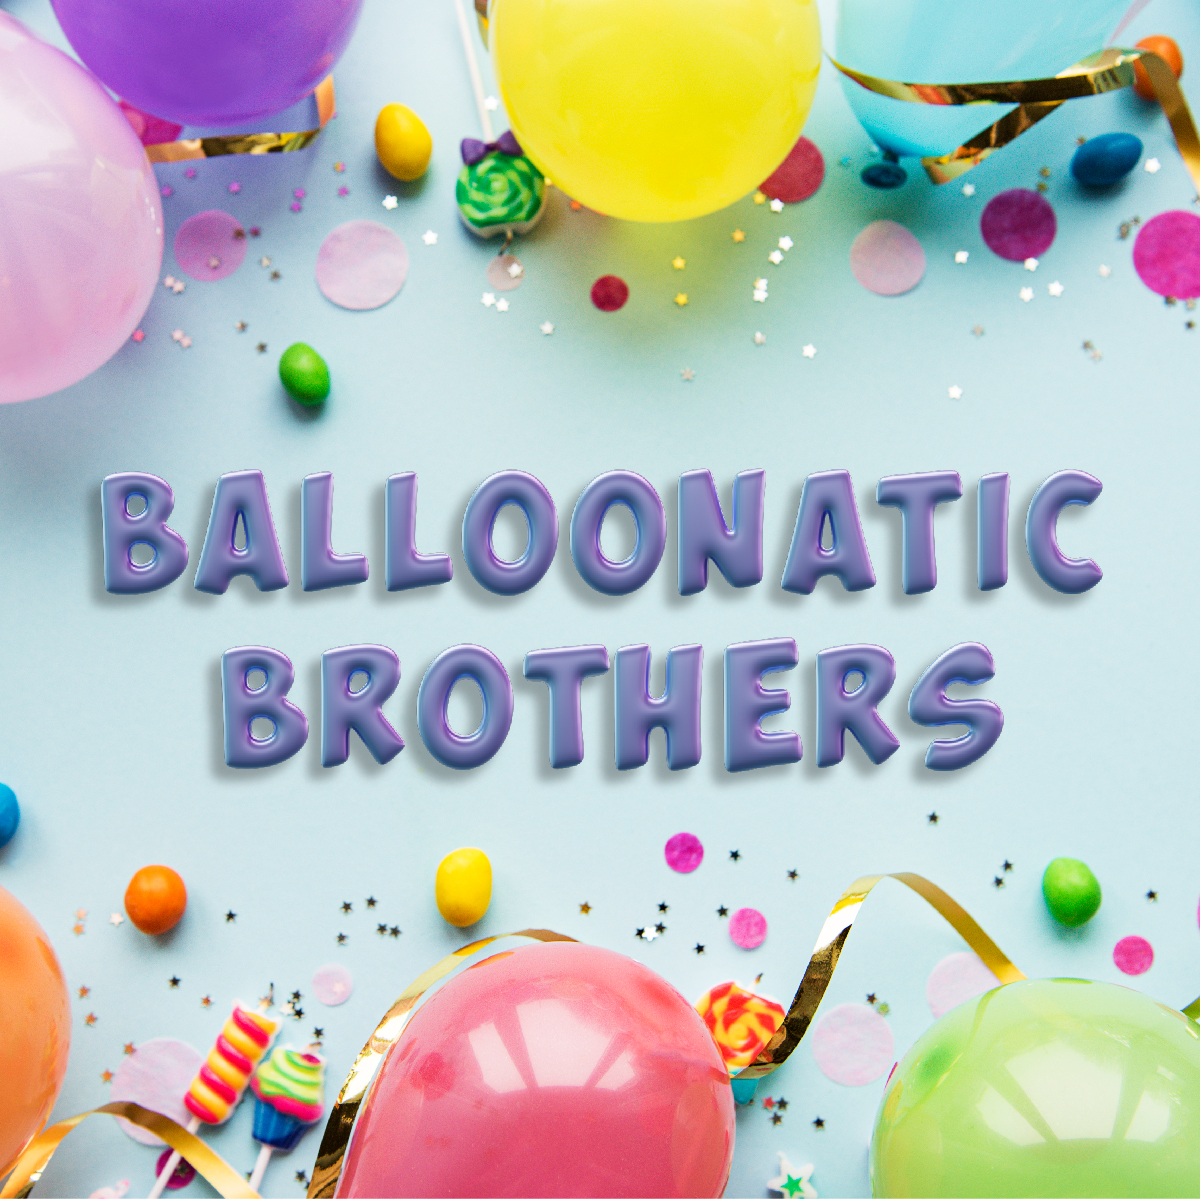 HRU032 Balloonatic Brothers Output 01